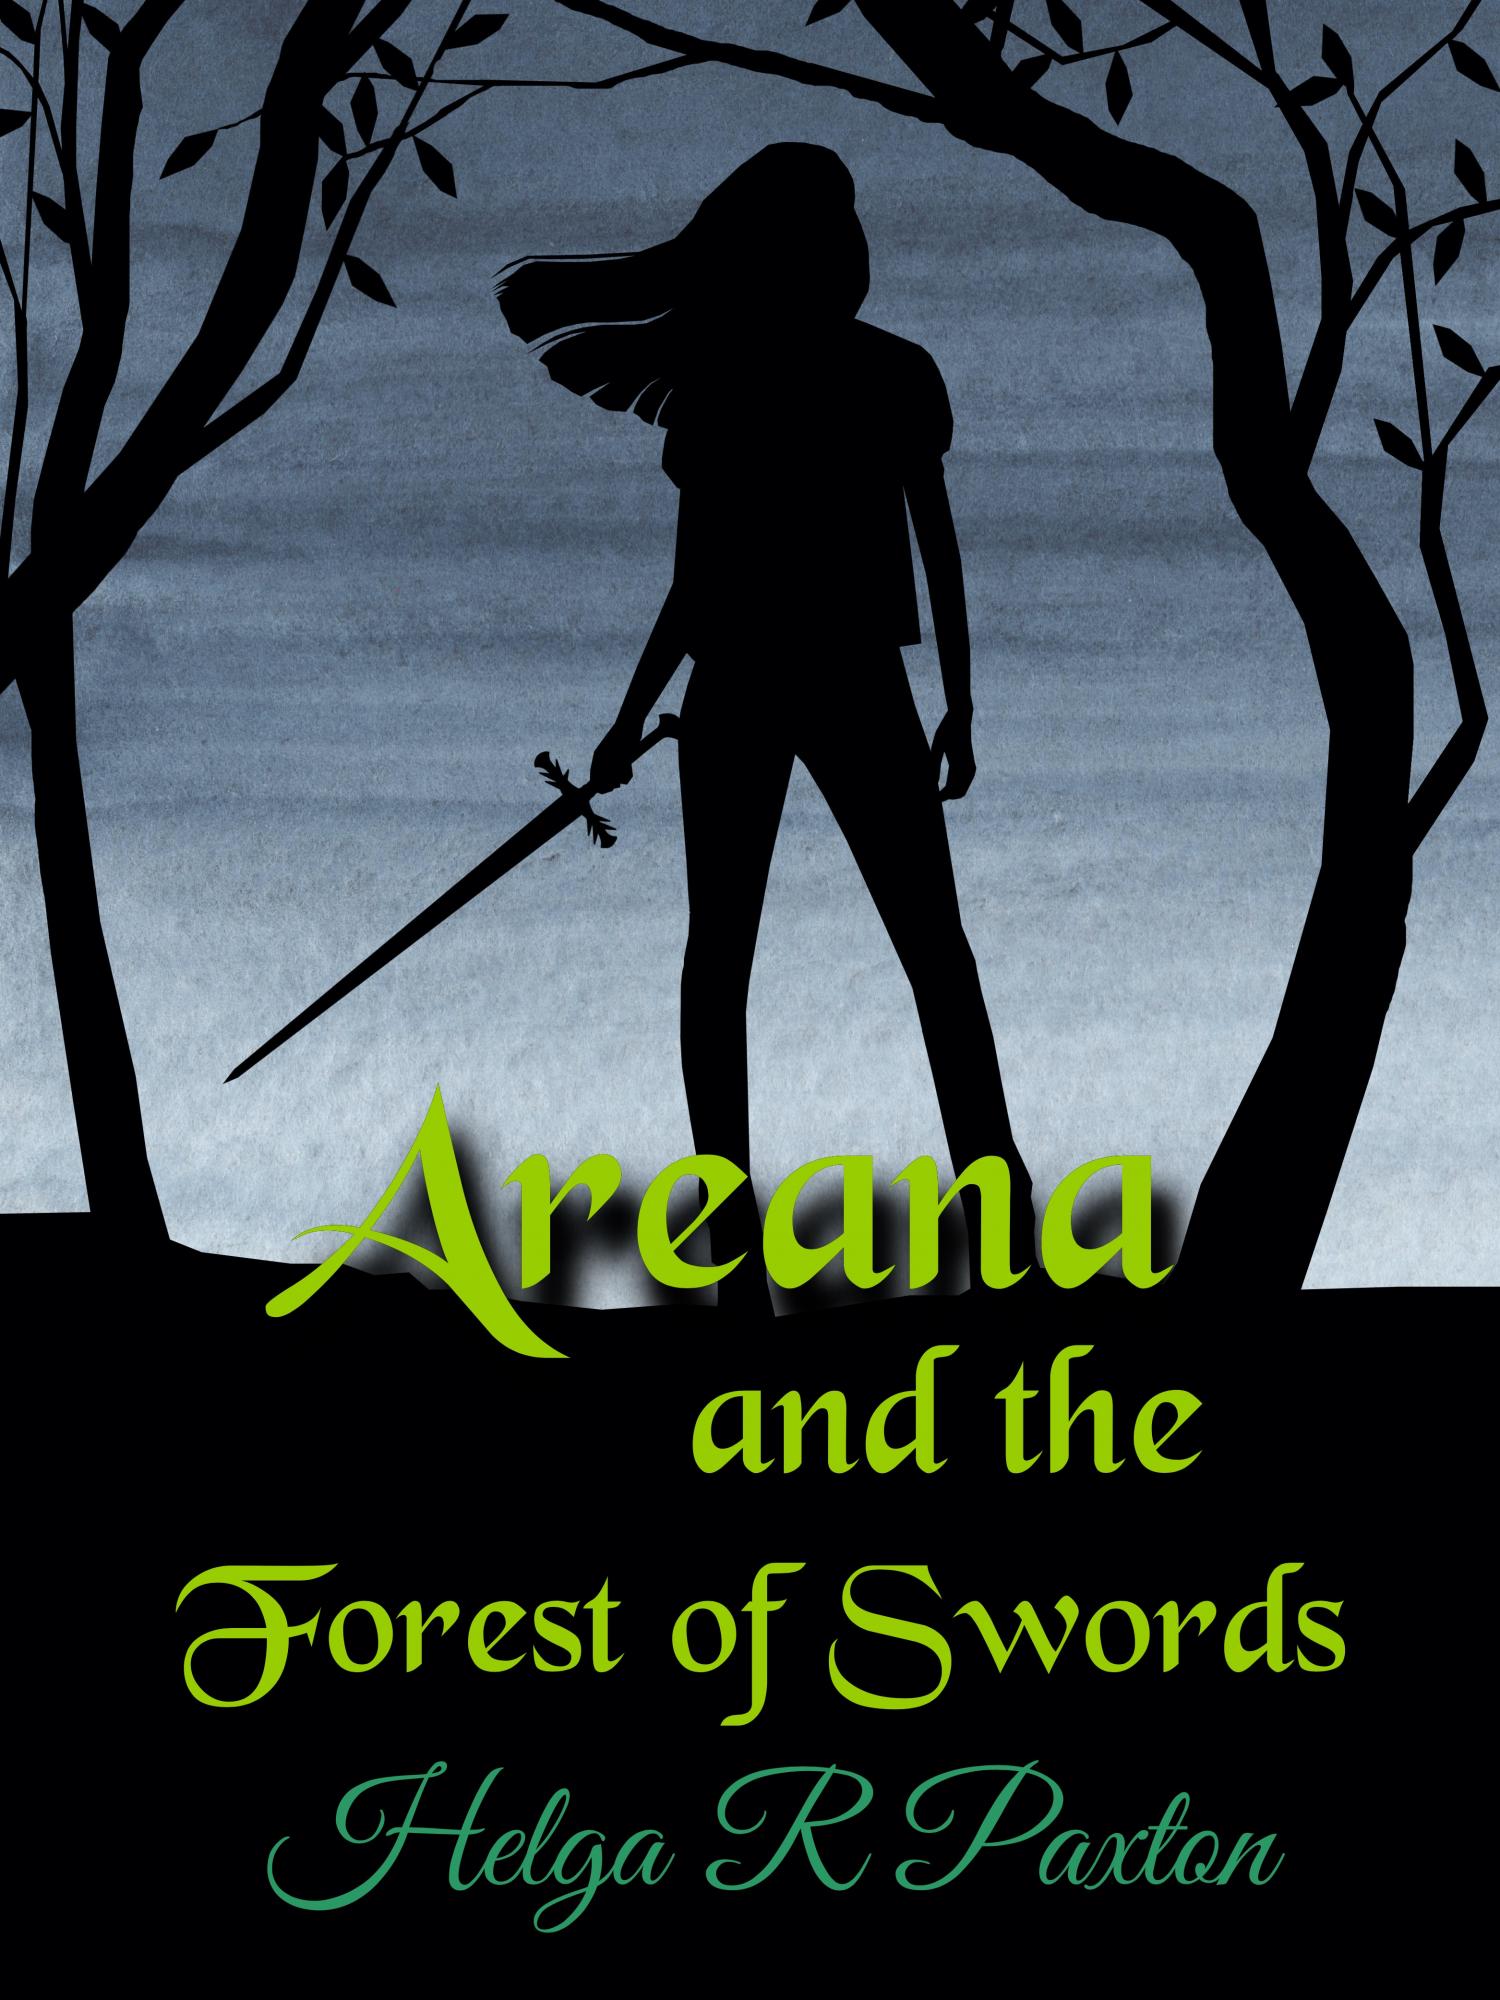 Areana and the Forest of Swords, by Helga R Paxton, 21-September-2020